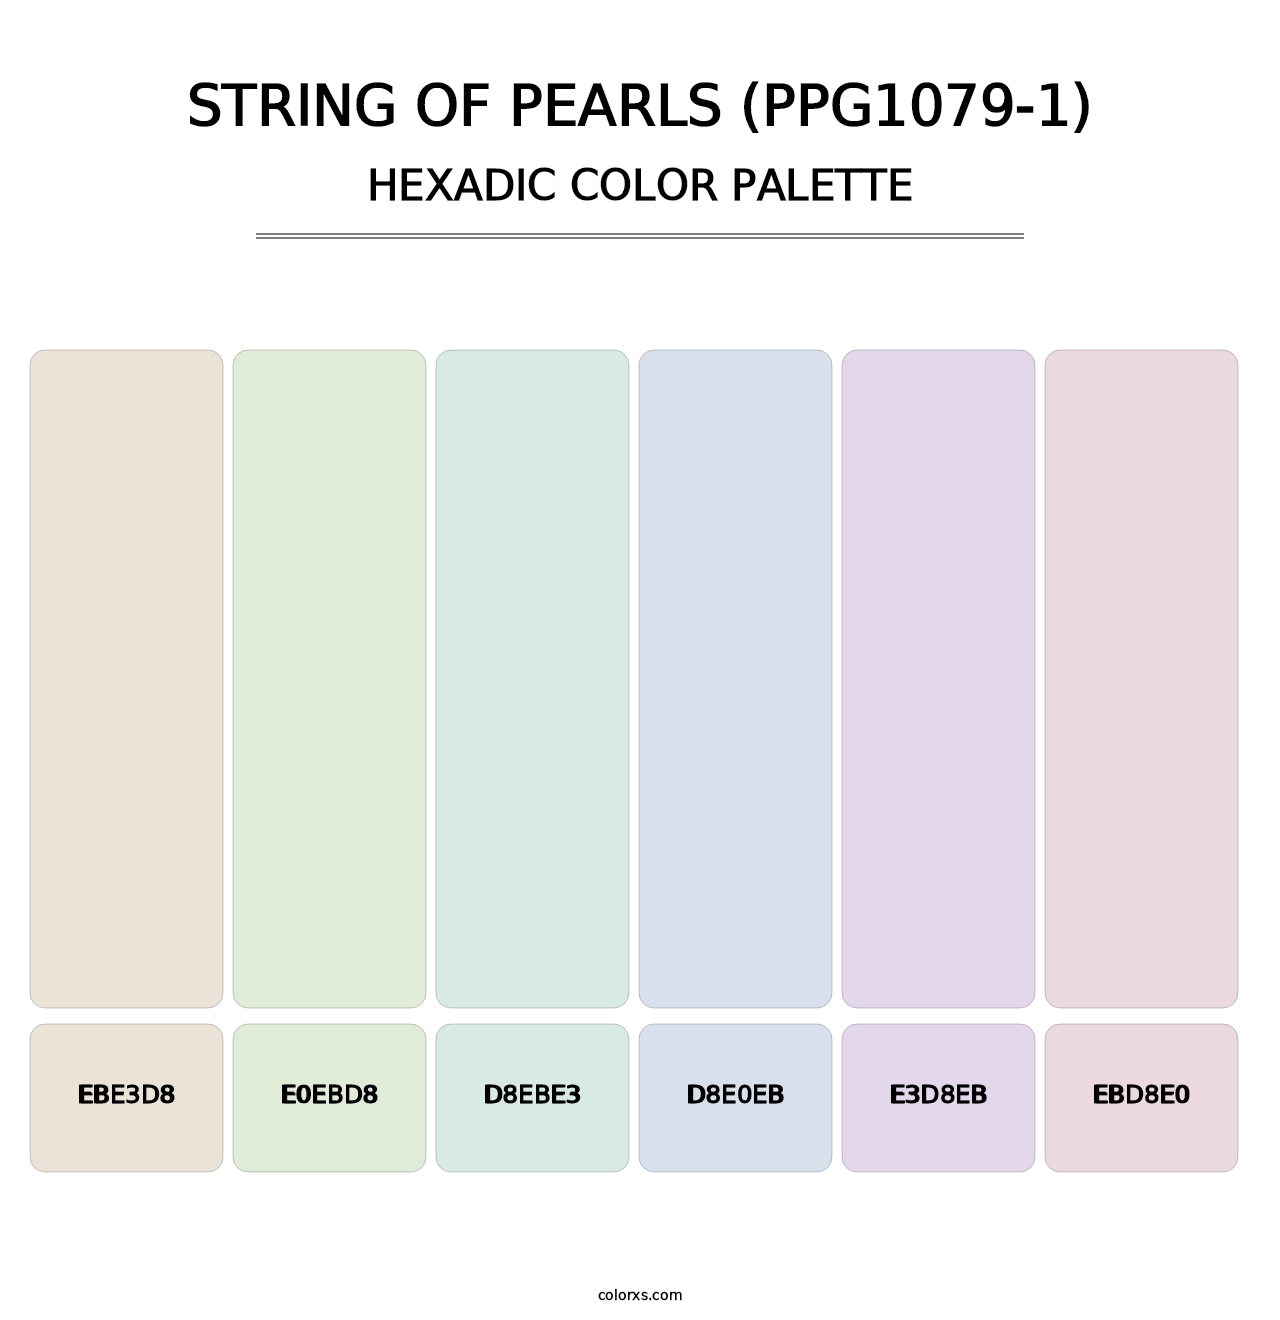 String Of Pearls (PPG1079-1) - Hexadic Color Palette